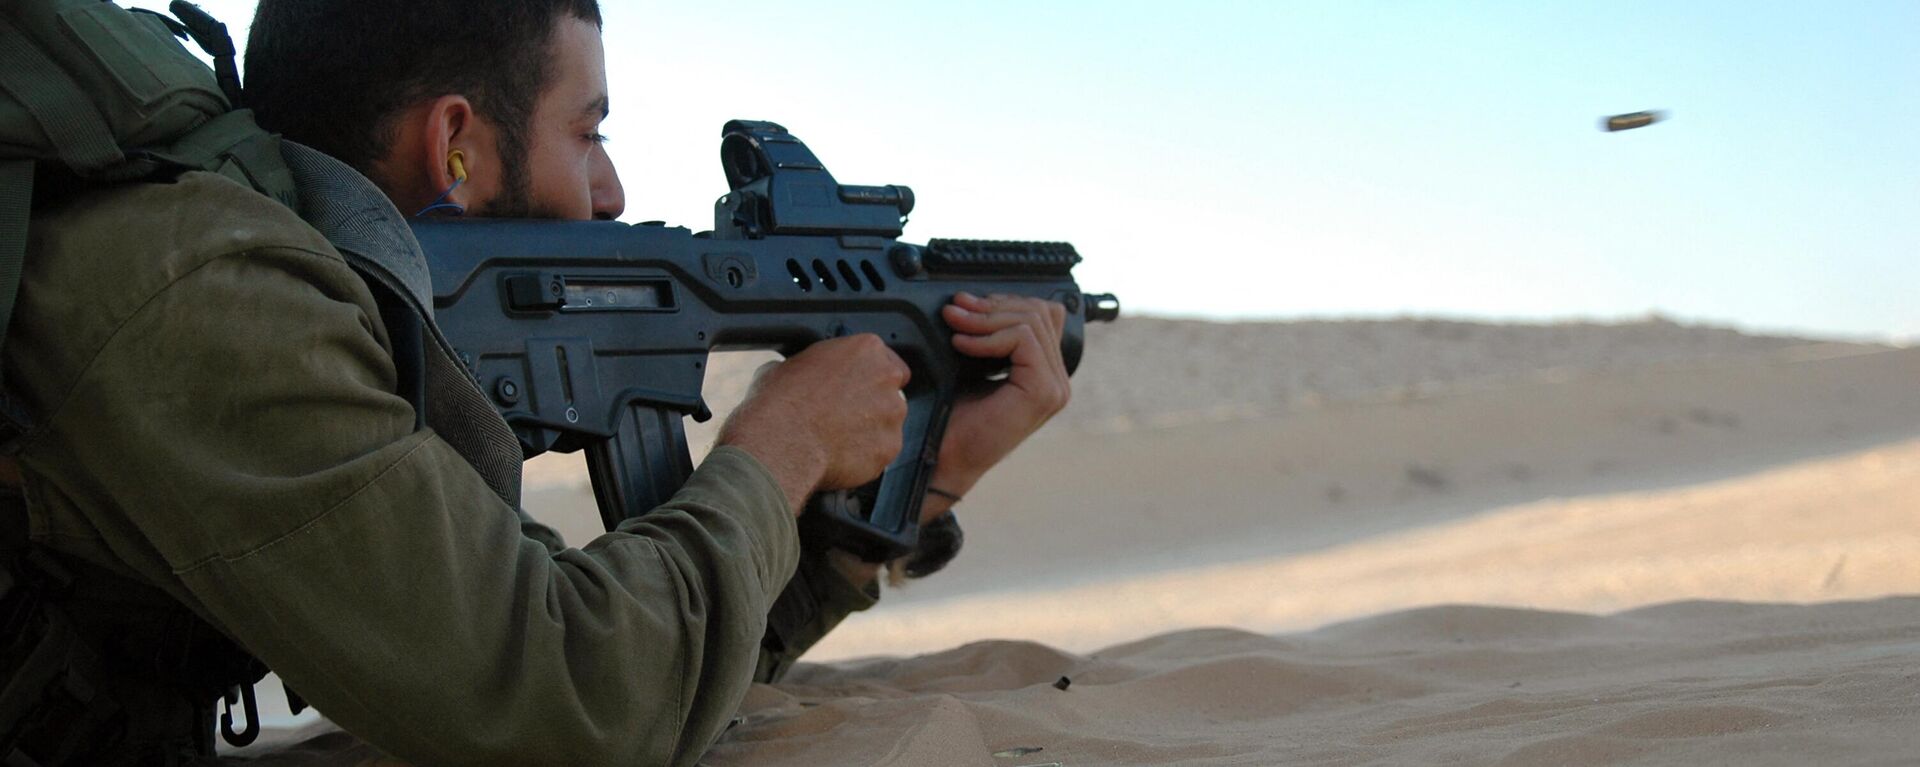 An Israeli soldier fires a TAR-21 weapon, which stands for Tavor Assault Rifle - 21st Century at a military shooting range in southern Israel on July 6, 2009. - Sputnik India, 1920, 11.10.2023